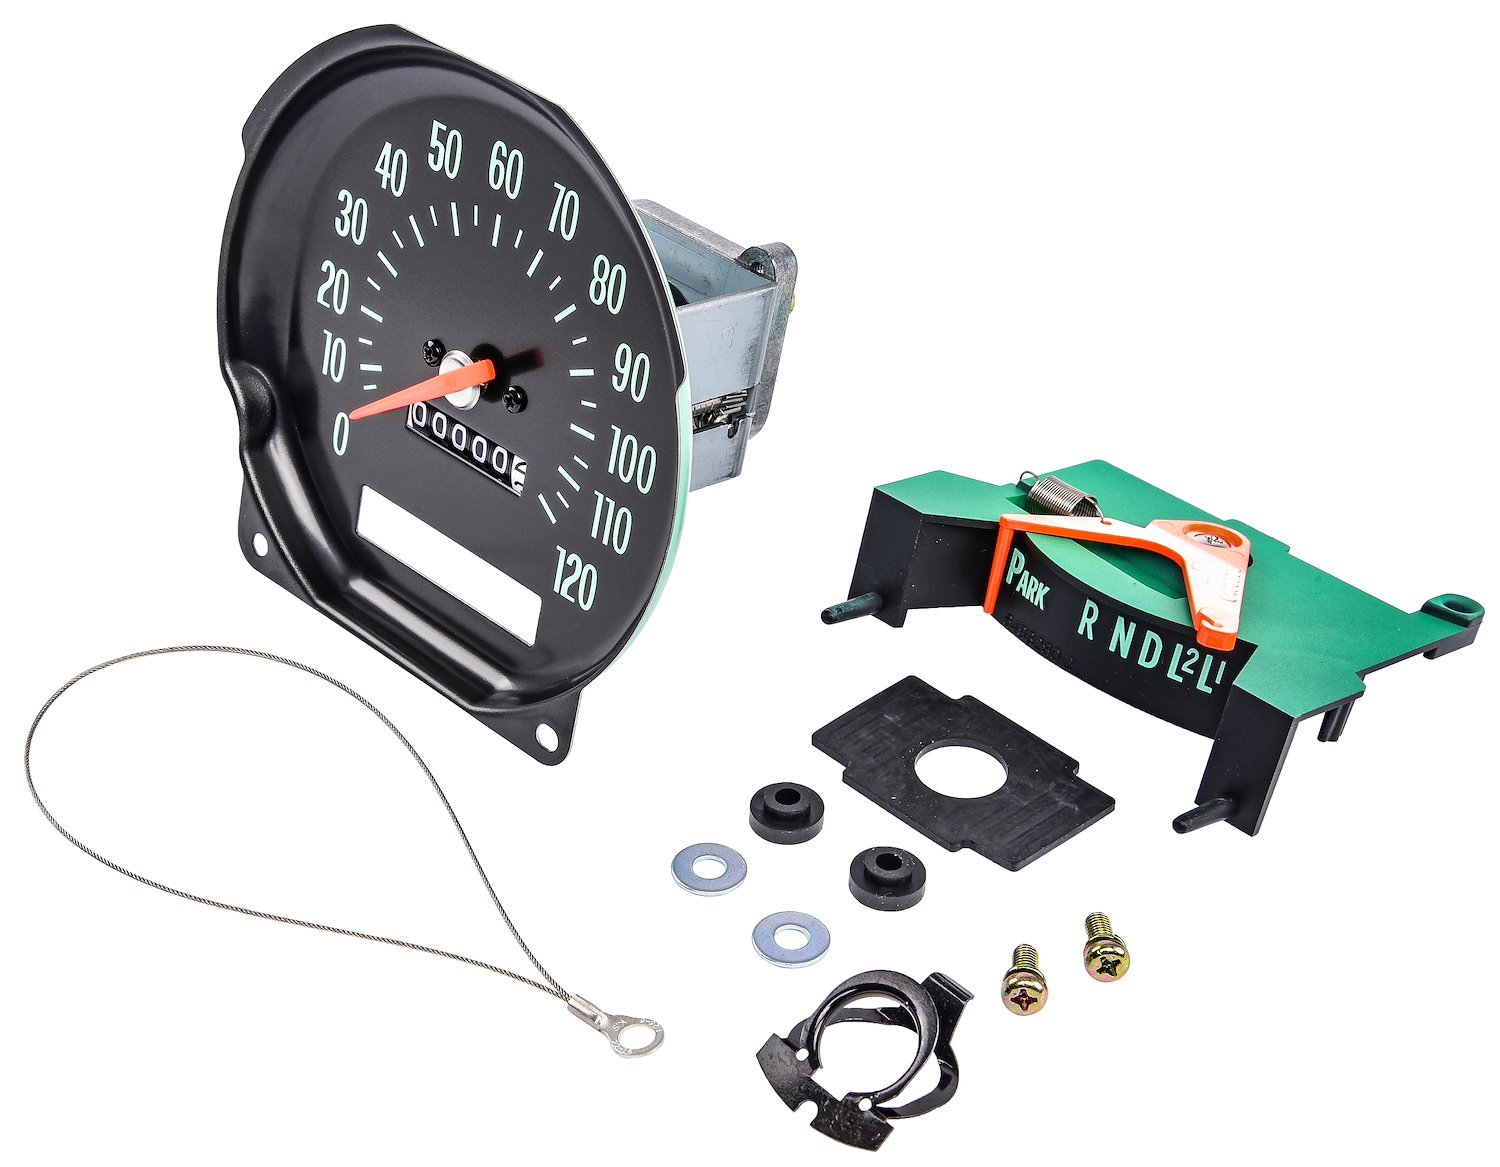 Factory Style Speedometer for 1970 Chevrolet Chevelle, El Camino and Monte Carlo with SS Dash and Column Shift [0-120 MPH]